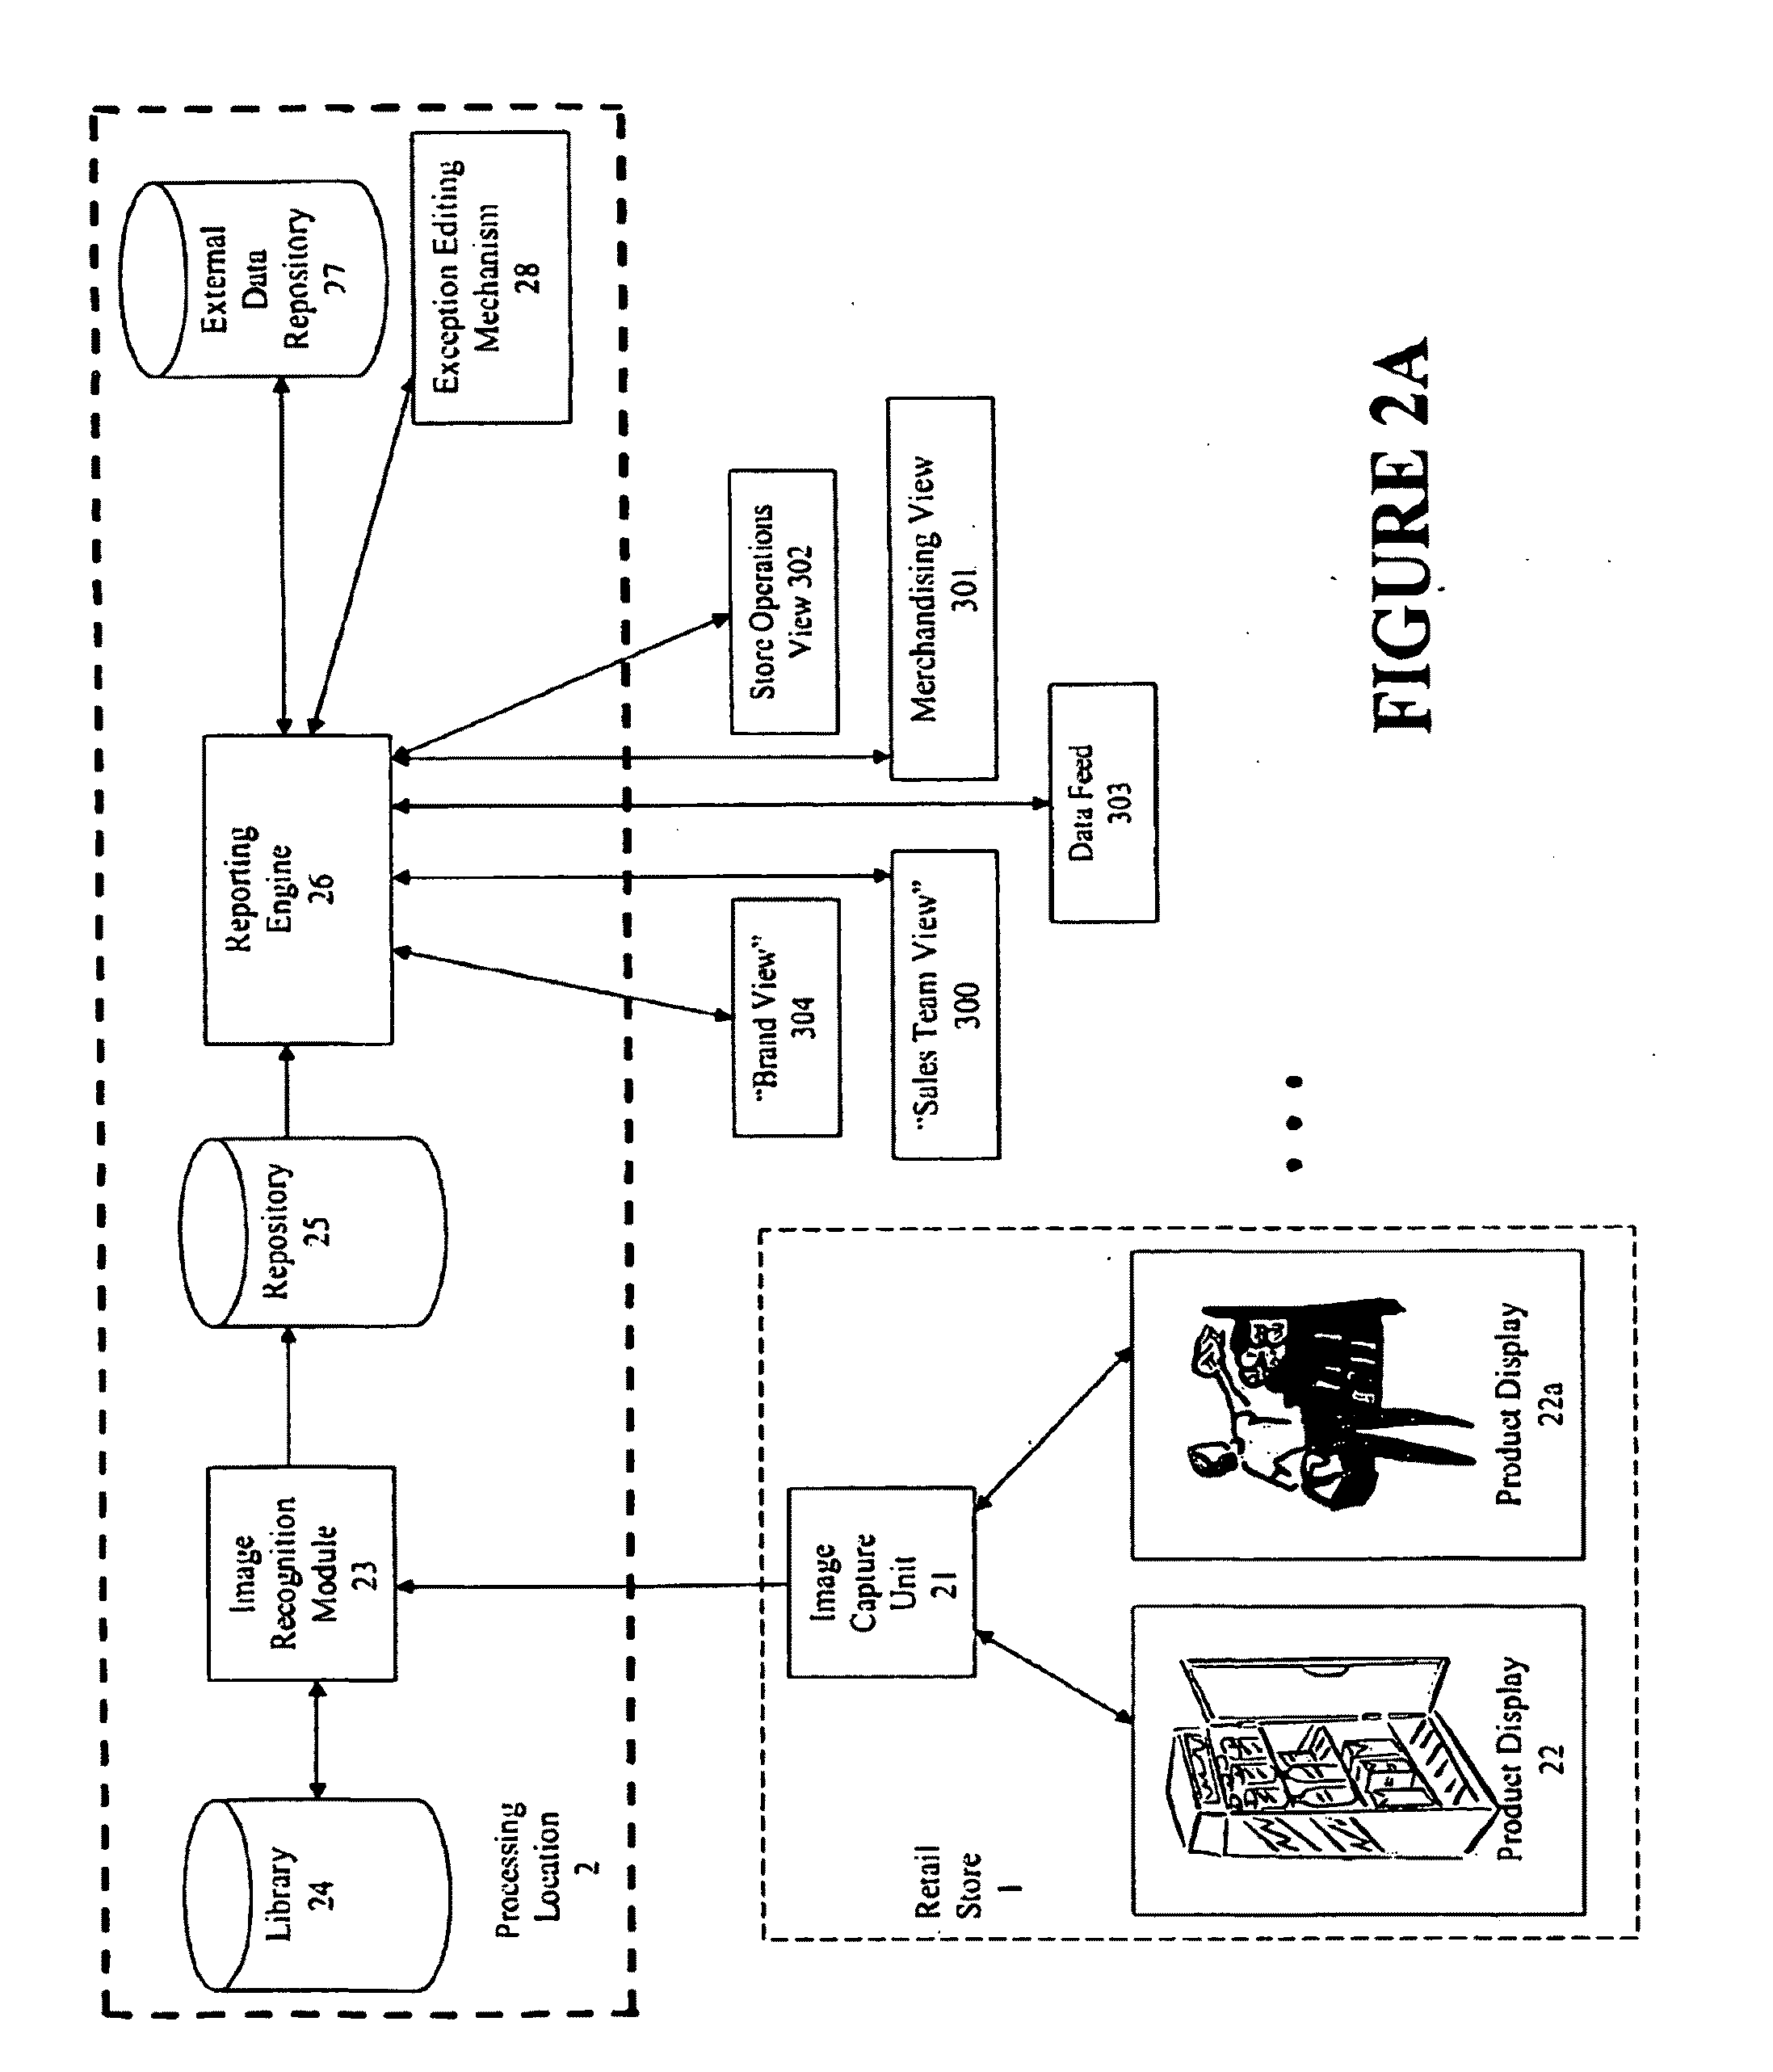 Method for measuring retail display and compliance